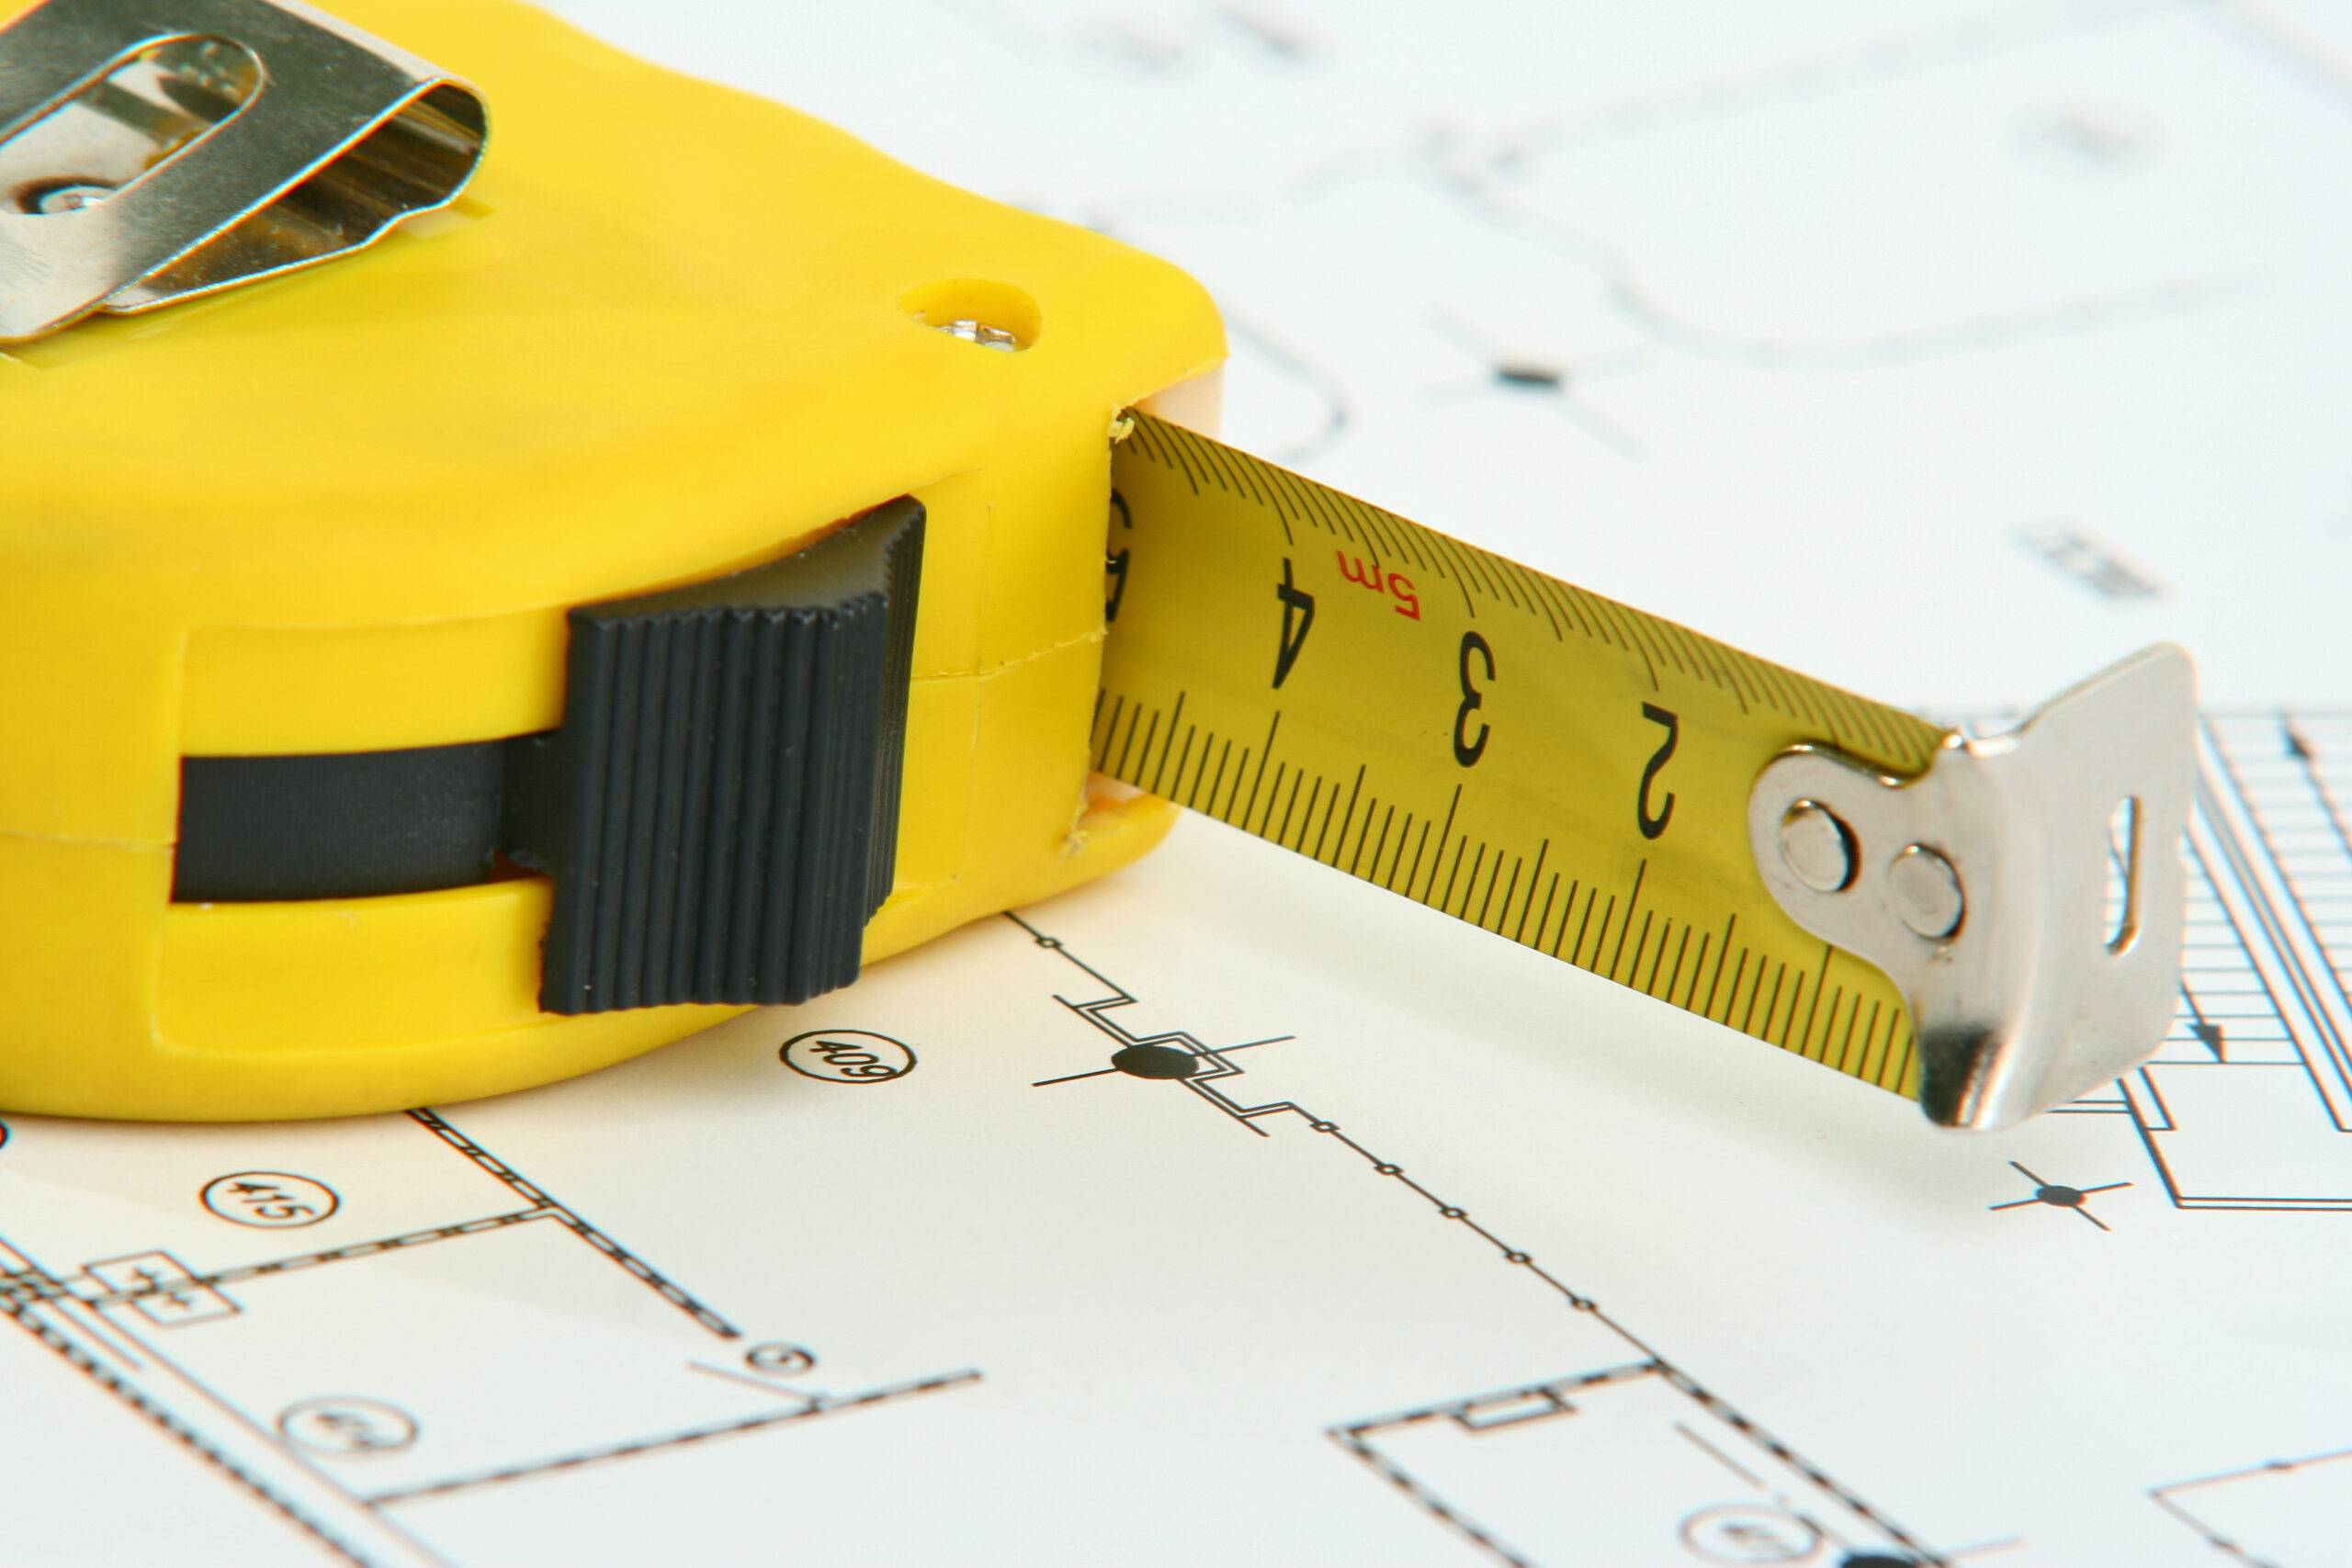 A measuring tape on a blueprint drawing.